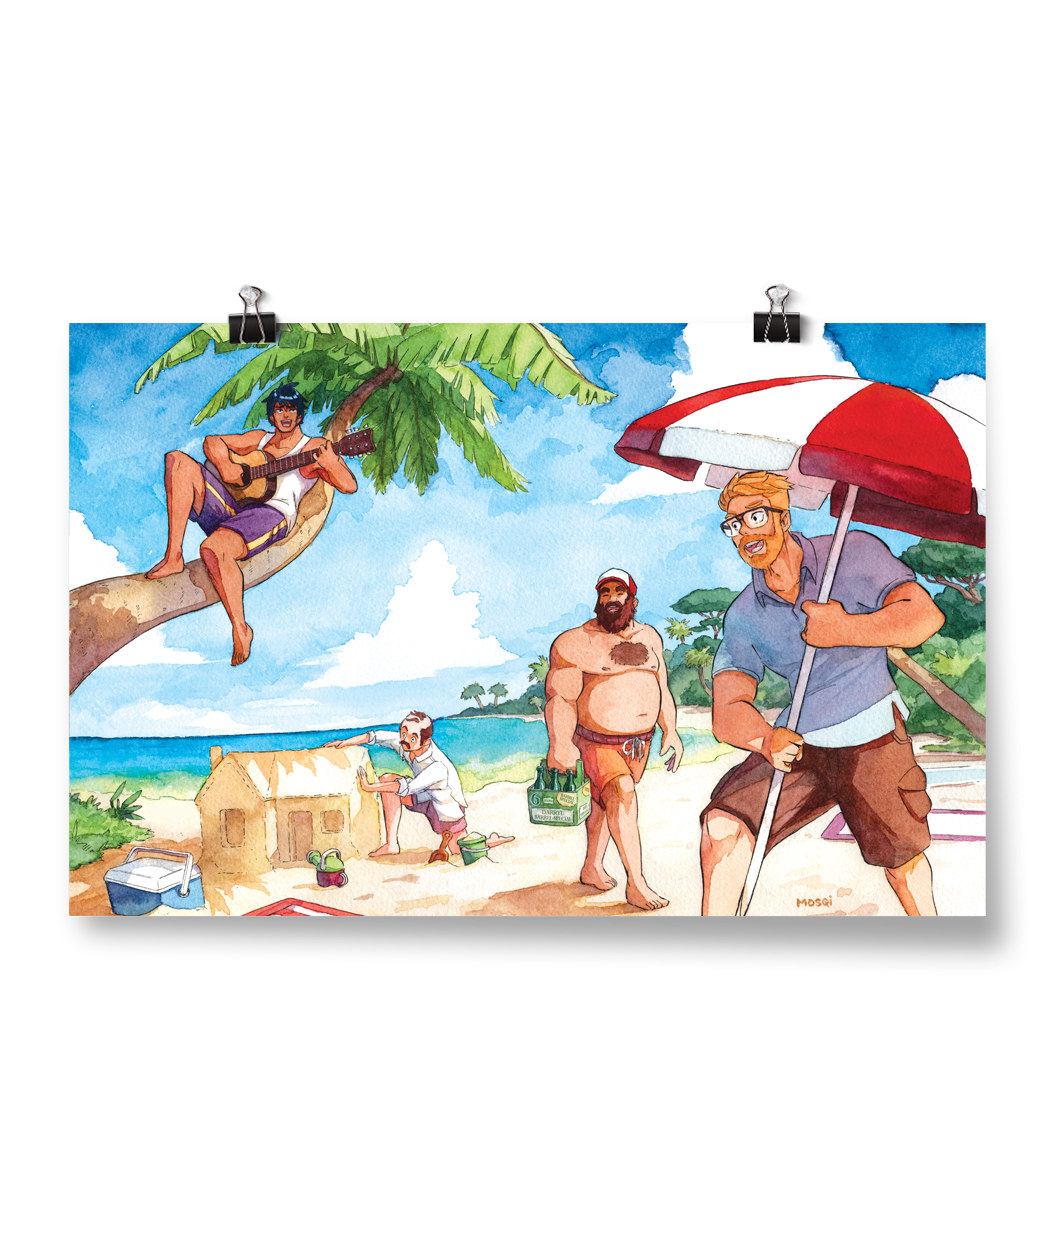 A poster with a watercolor illustration of a beach. There is a man sitting in a palm tree with his guitar, another balding man building a sand castle, a shirtless larger man in a dad hat carrying a 6 pack of beers, and on the far right in the foreground in a blond man wearing glasses staking a red and white umbrella into the sand.